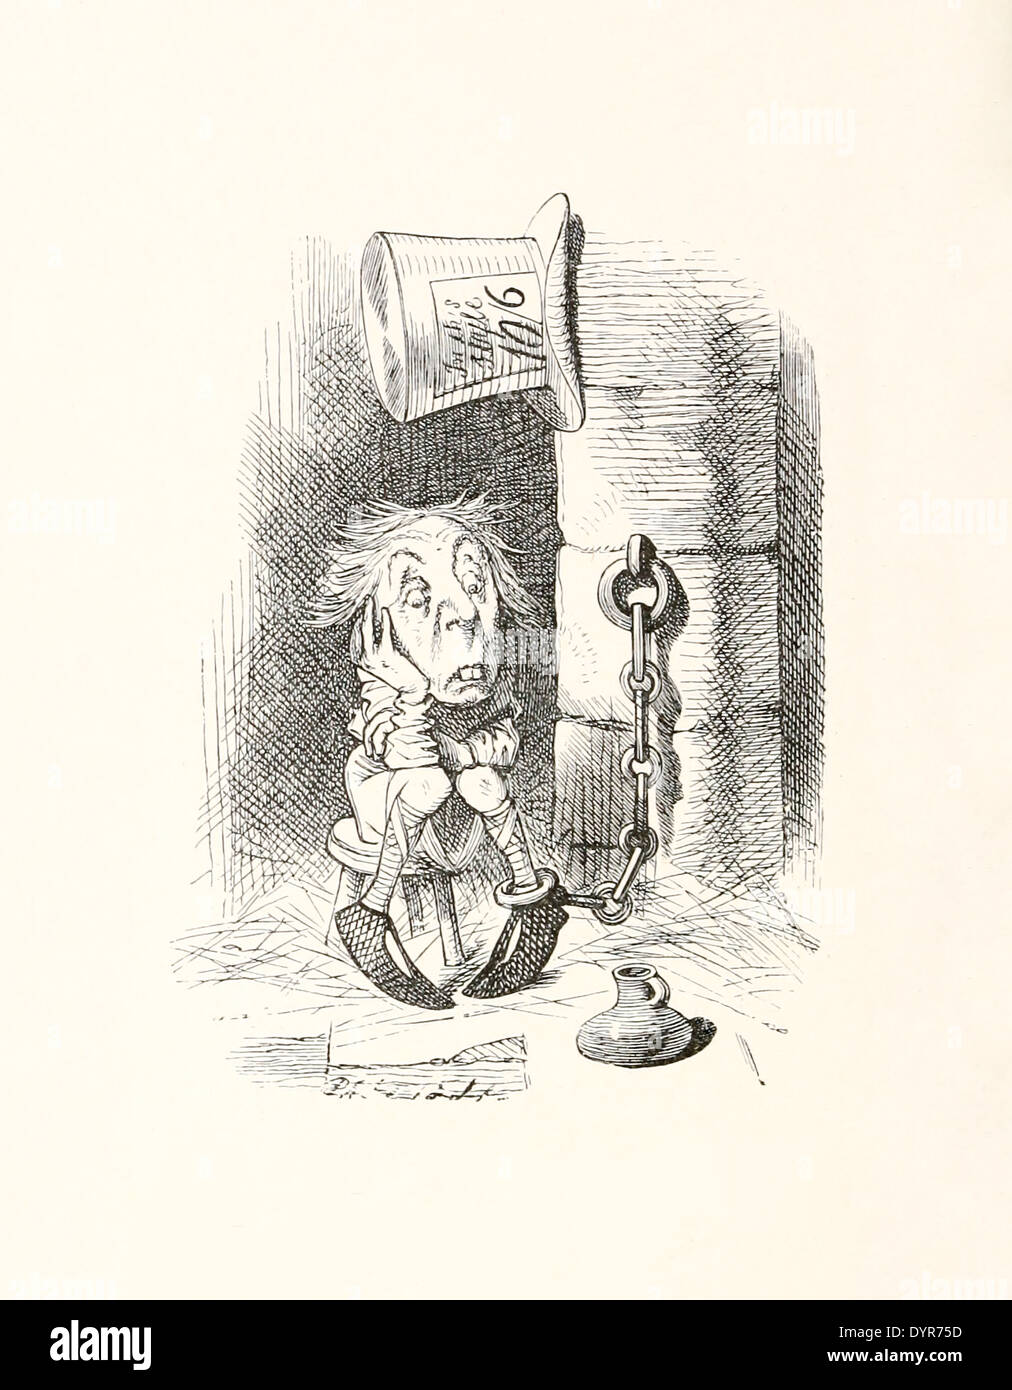 Lewis Carroll: Innocent or Guilty?